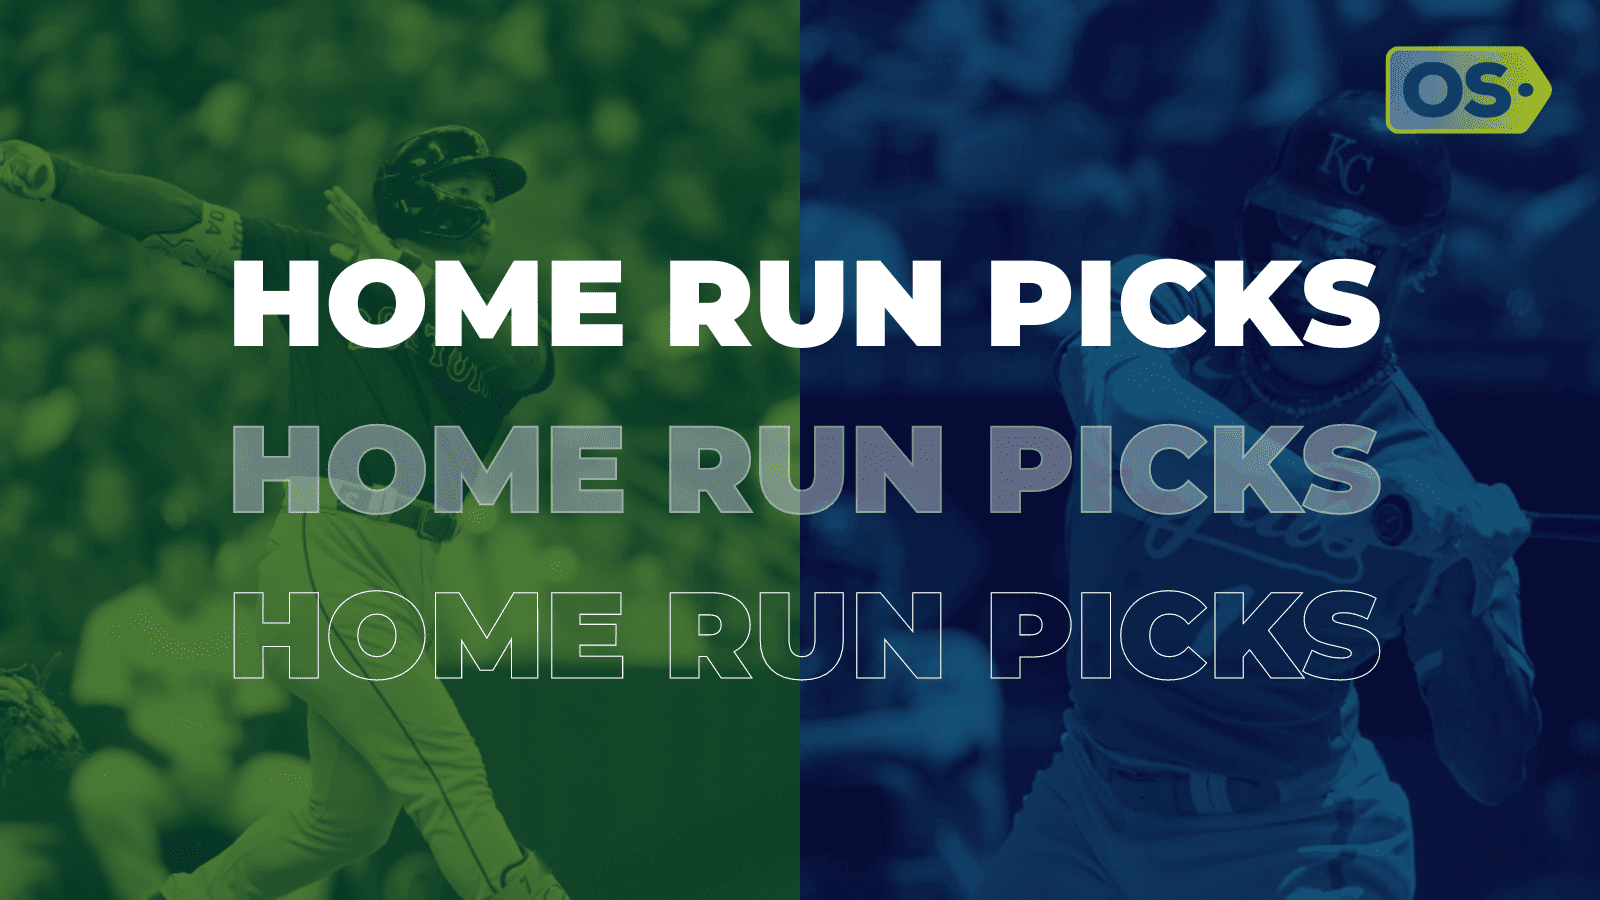 The best MLB home run picks and bets today include one player for the Padres, who will take on the Giants in San Fran...